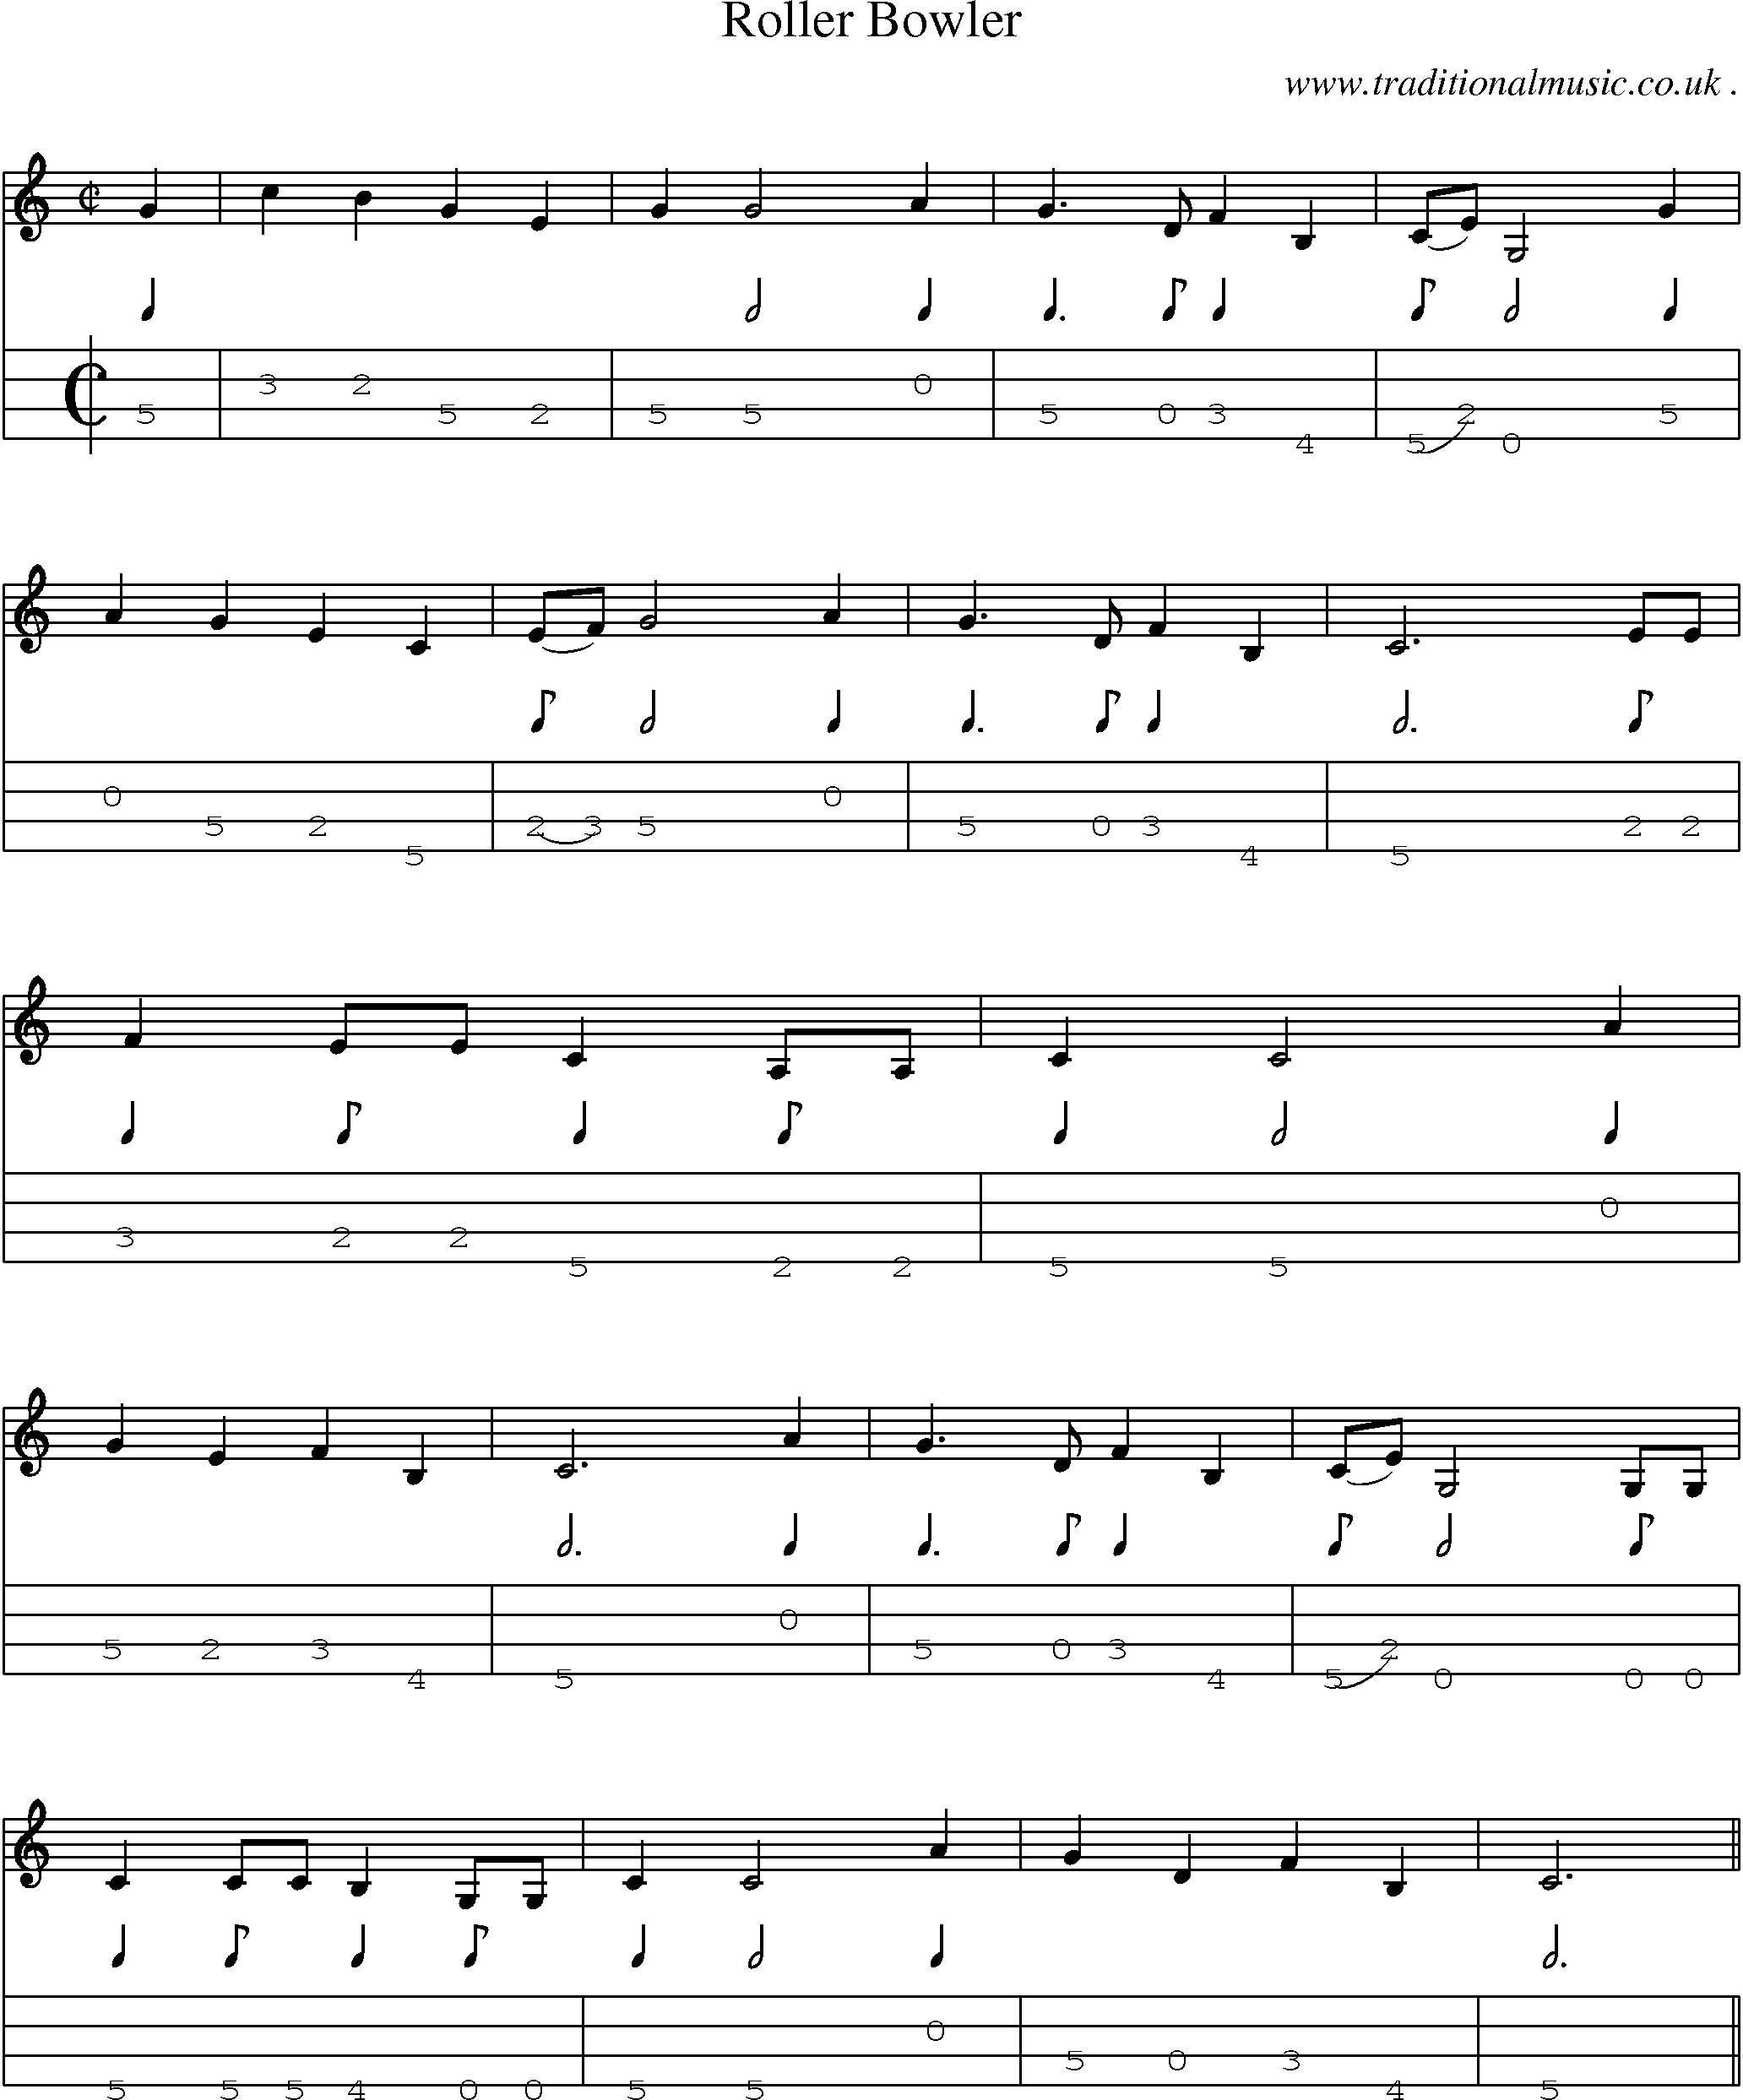 Sheet-Music and Mandolin Tabs for Roller Bowler